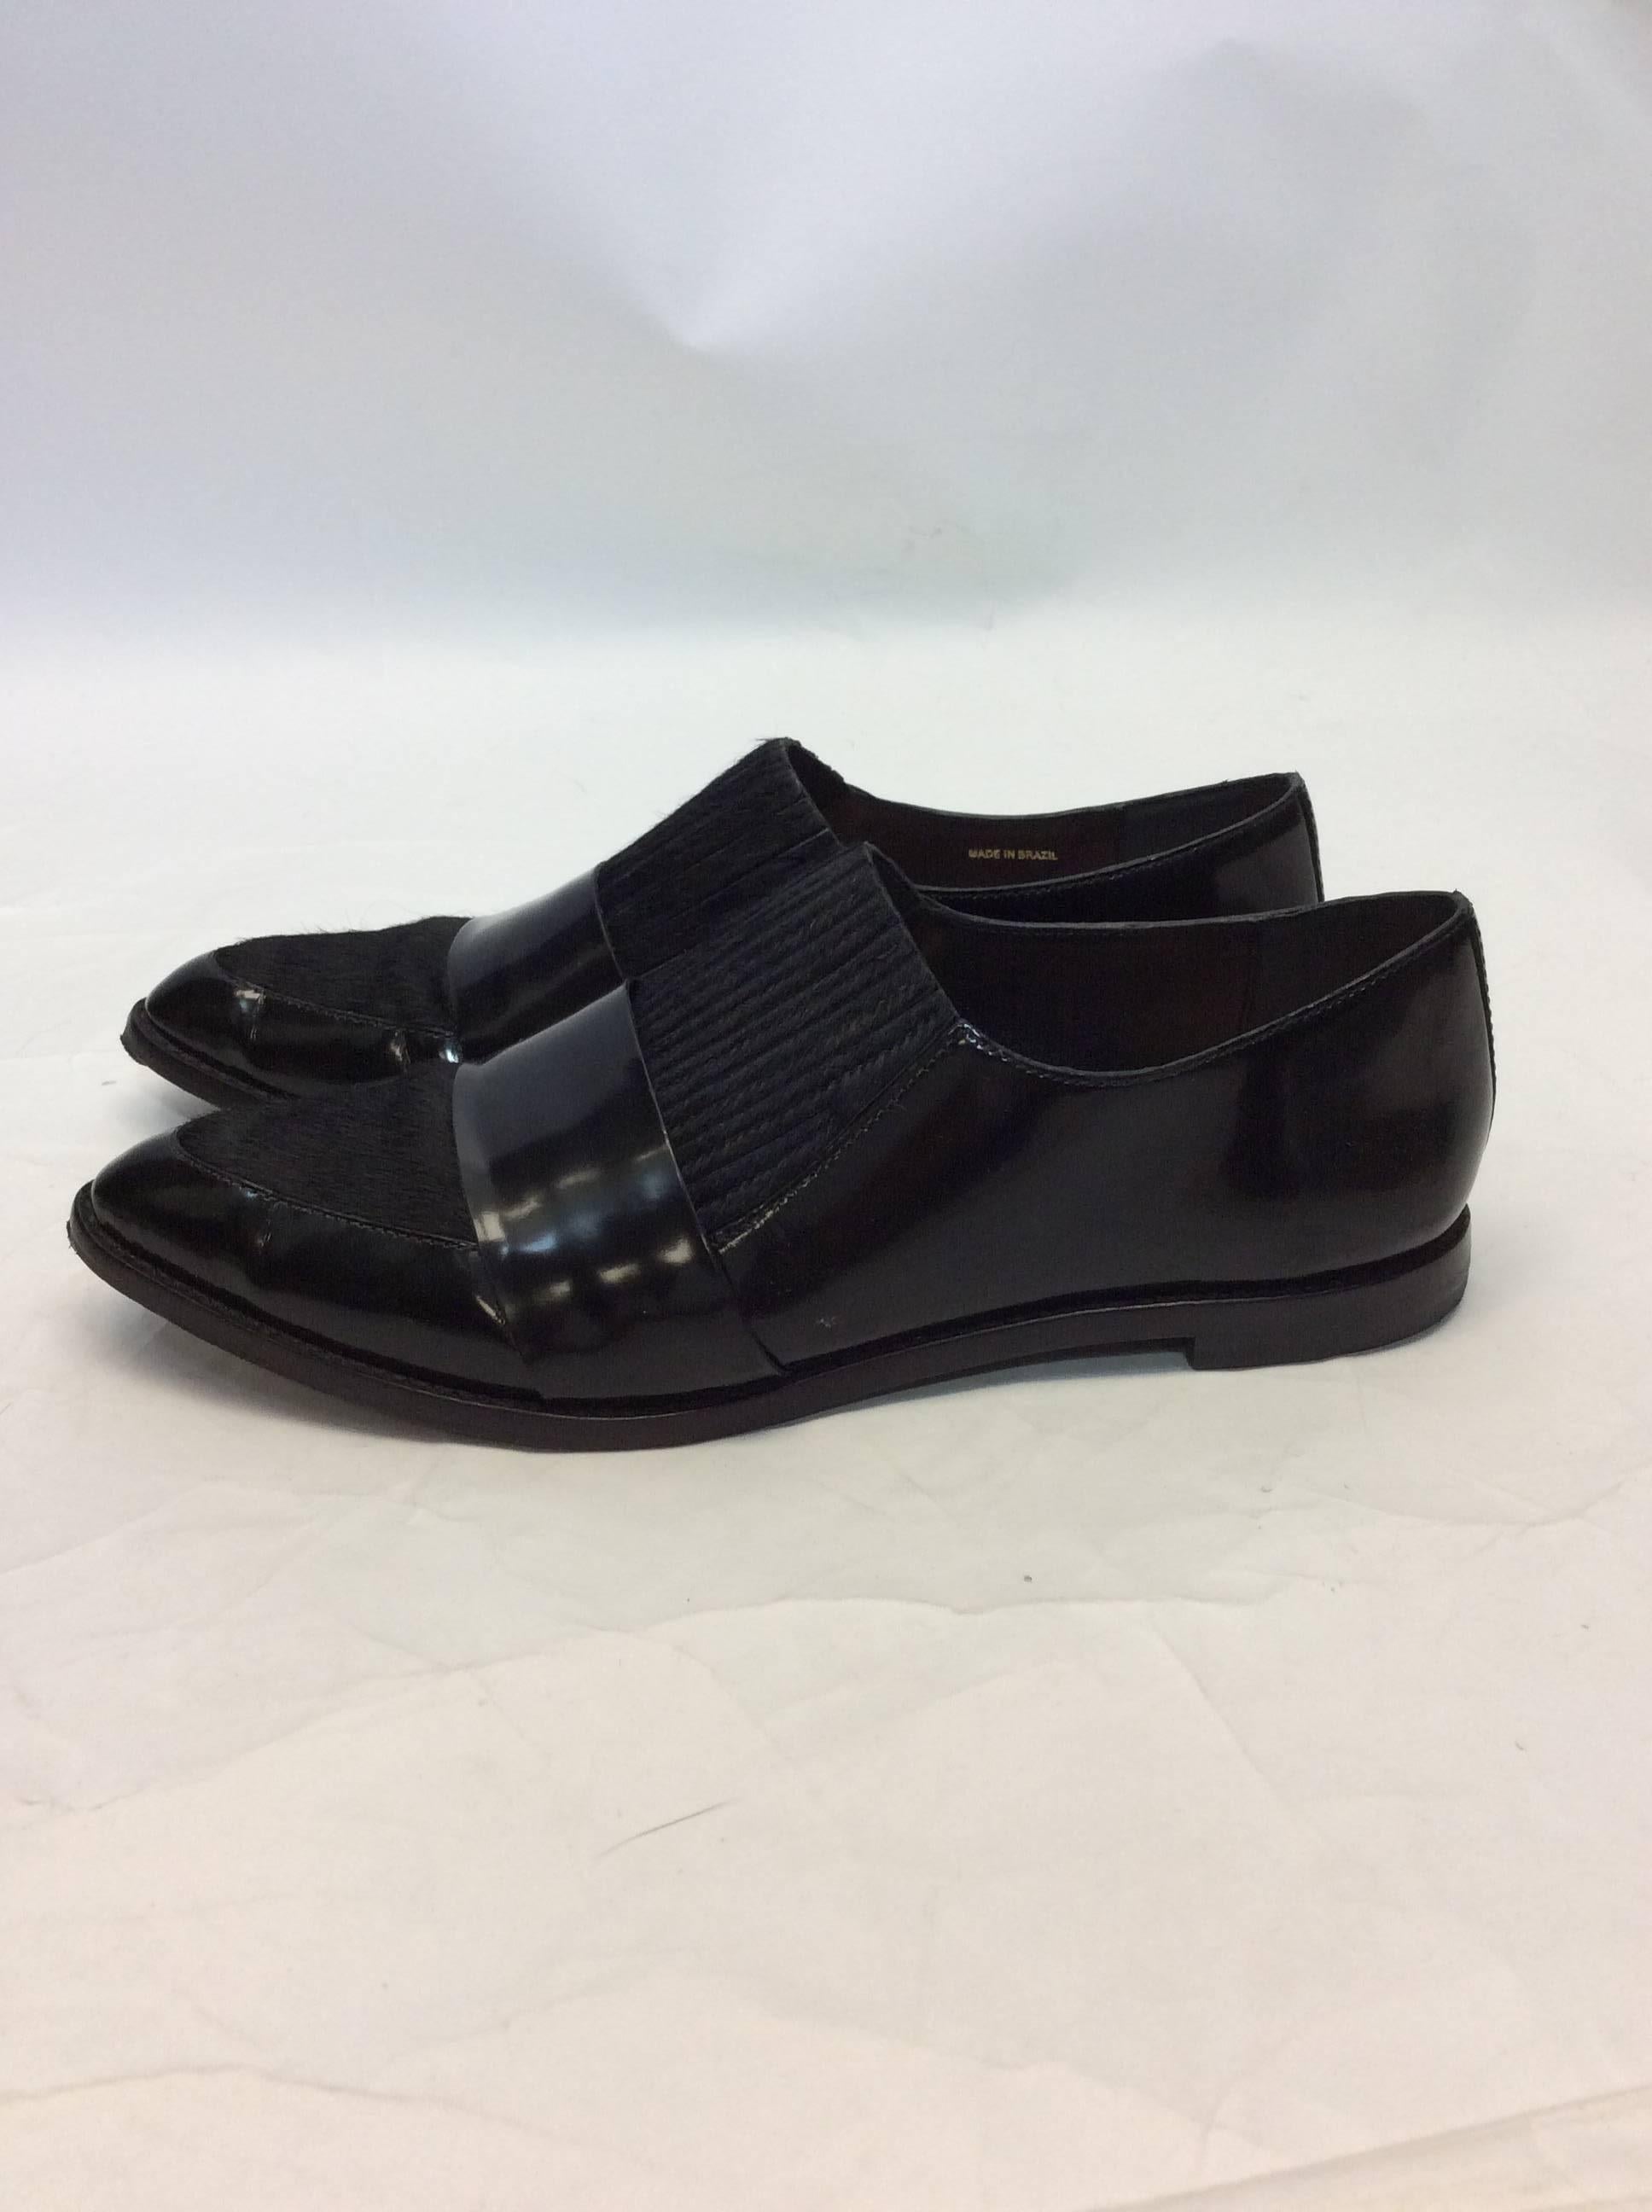 Loeffler Randall Rose Patent Leather & Calf Hair Loafer In Excellent Condition For Sale In Narberth, PA